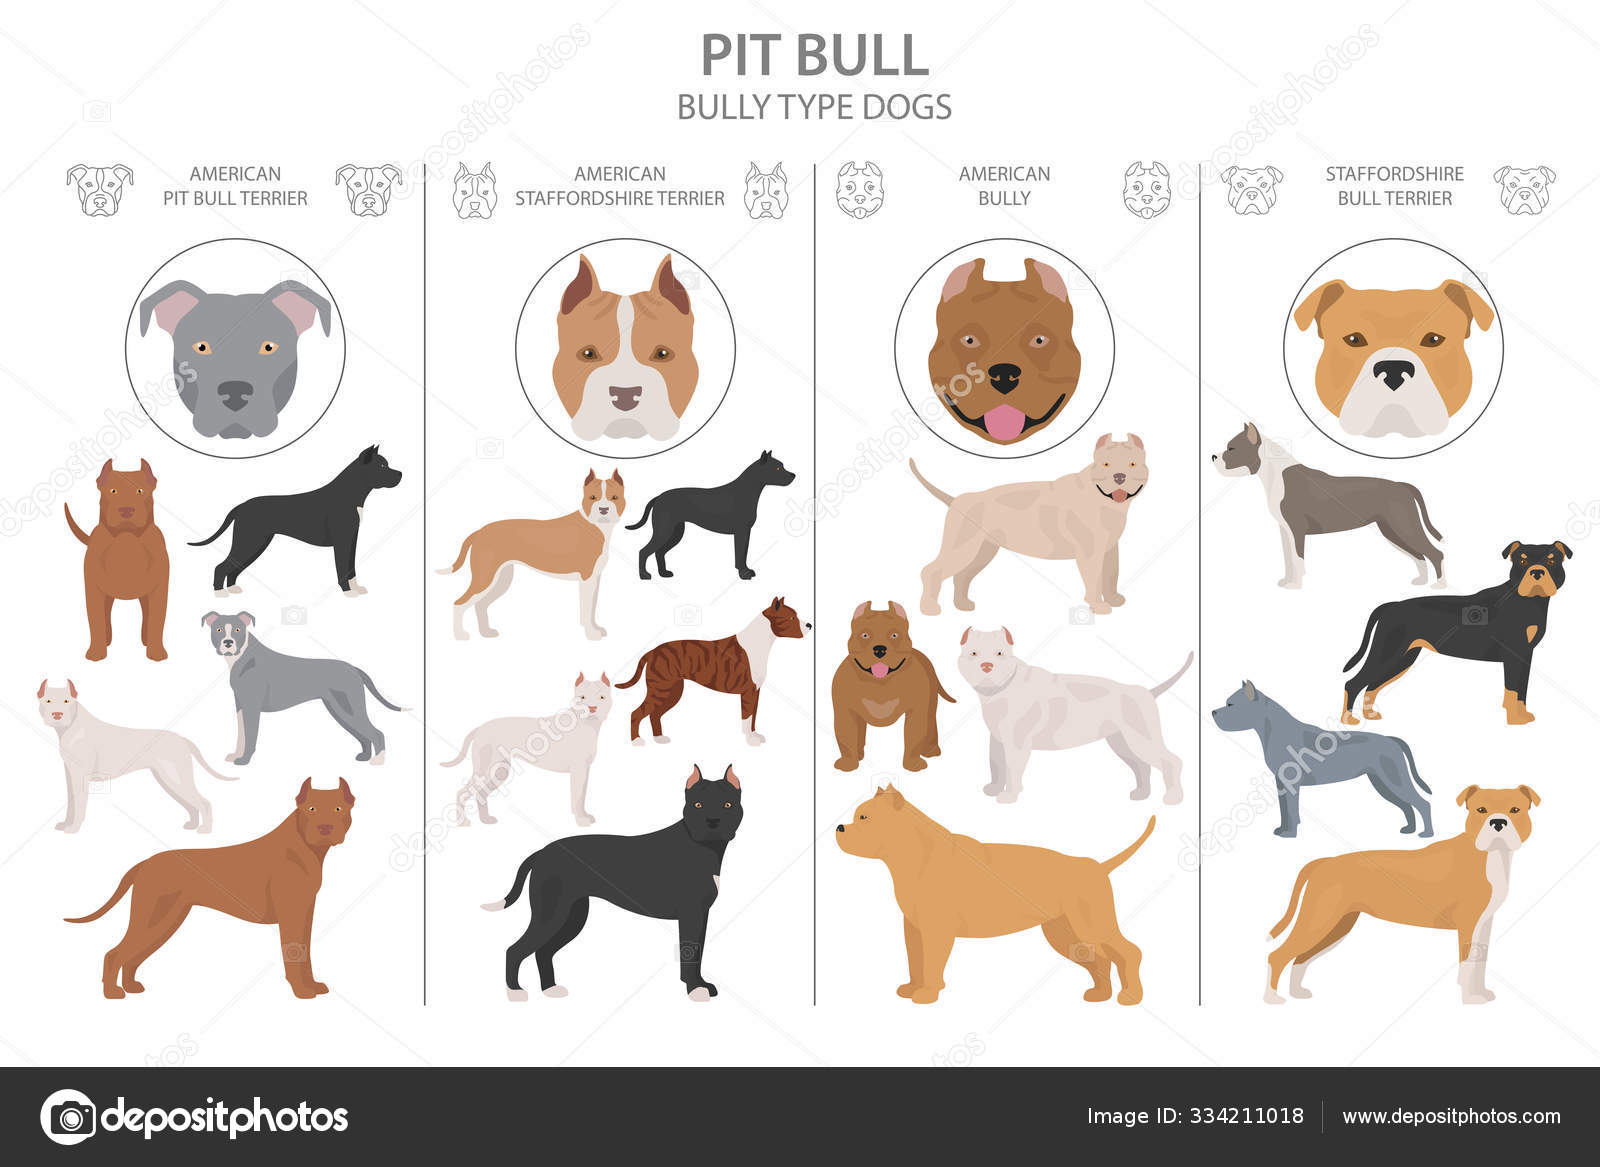 ᐈ Bully Pitbulls Stock Images Royalty Free American Bully Pictures Download On Depositphotos